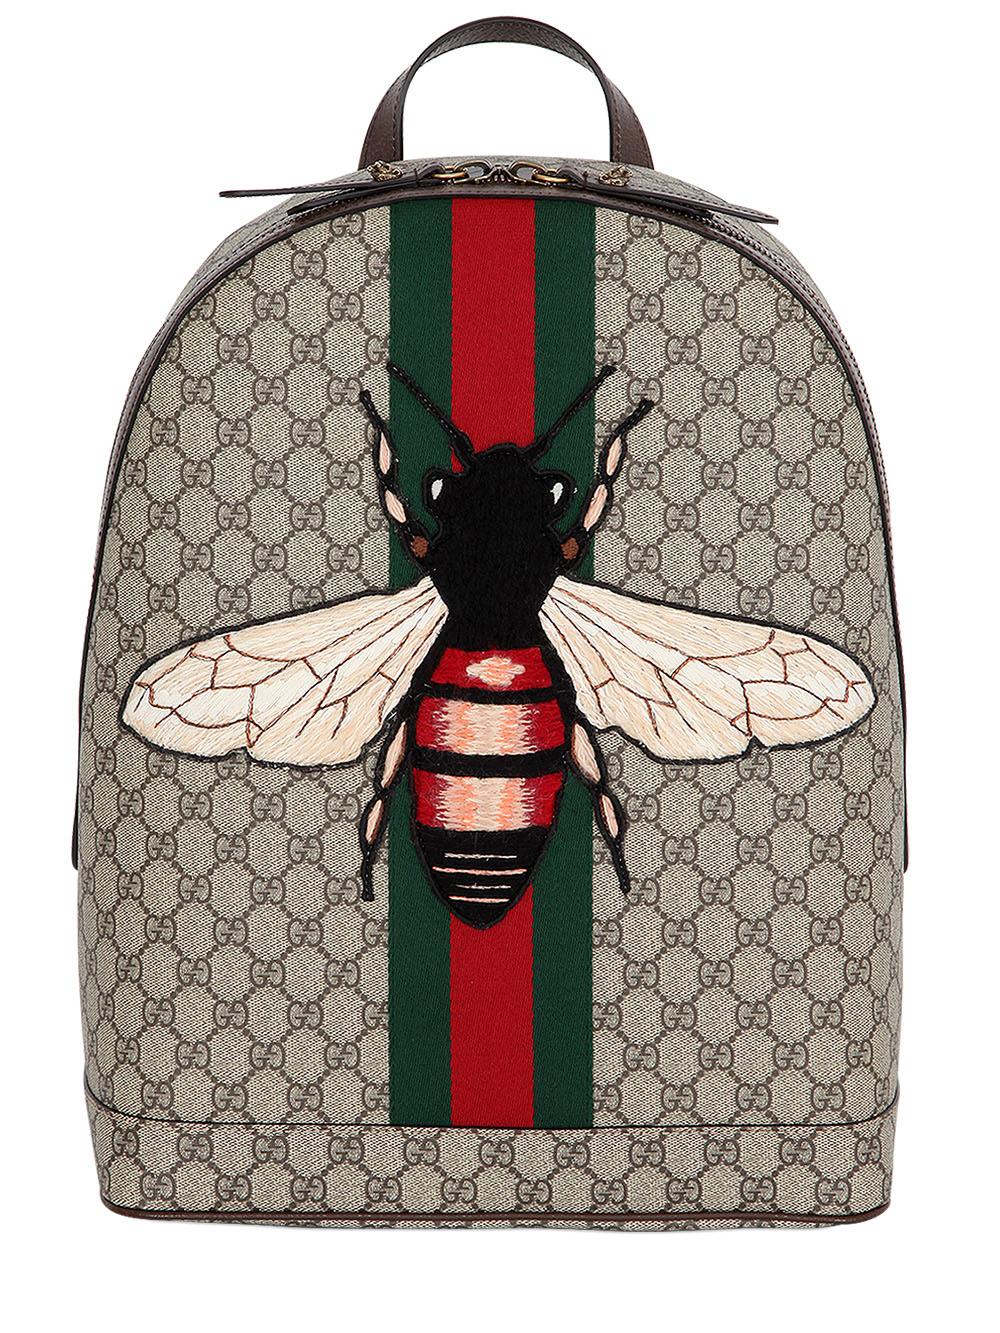 Gucci Leather Bee Patch Gg Supreme Backpack in Beige (Natural) - Lyst